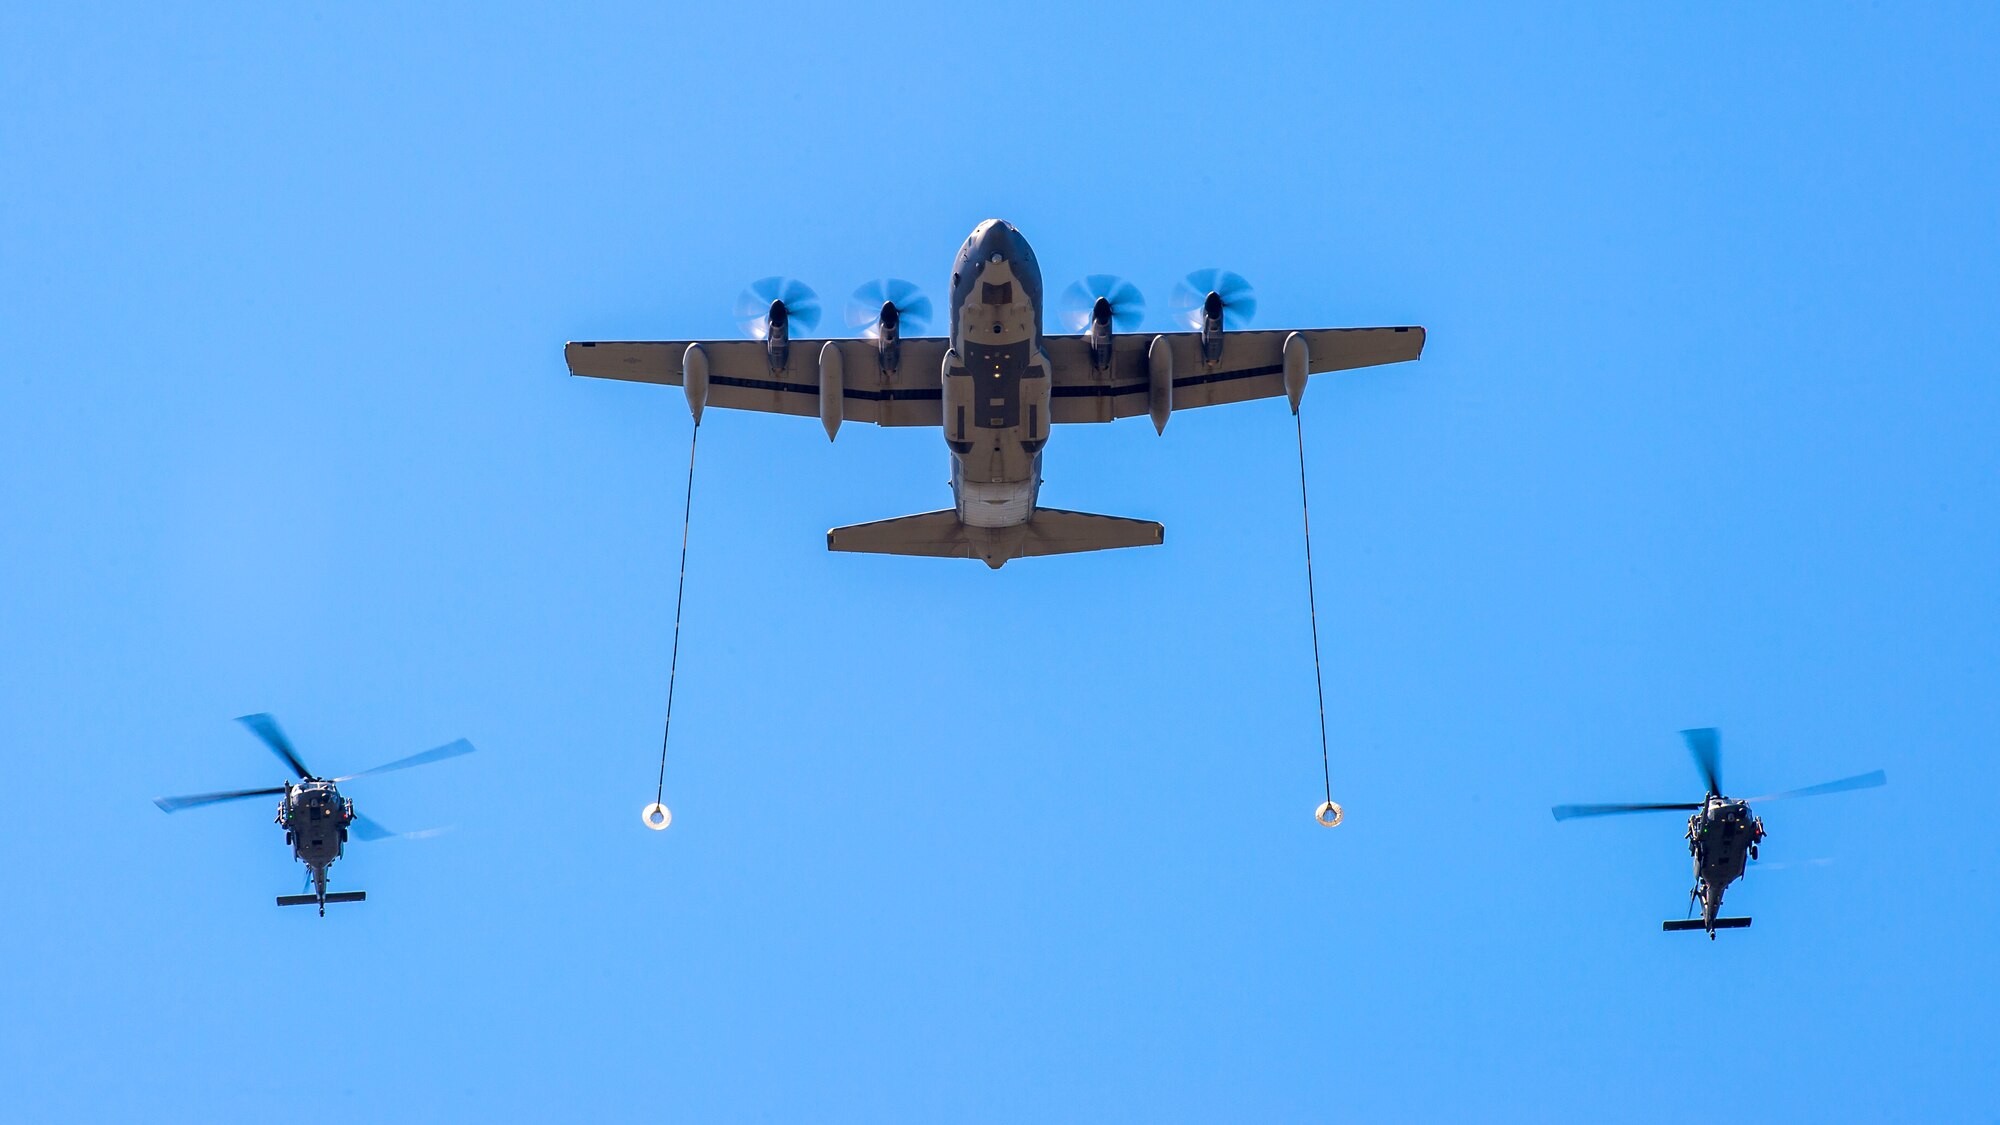 U.S. AIR FORCE ACADEMY, Colo. – Two HH-60 helicopters fly in formation with a C-130 showcasing a simulated air refueling operation on July 10, 2019 during a Combat Search and Rescue (CSAR) demonstration over the Terrazzo. The demonstration included a showcase of a variety of aircraft including four A-10s, two HH-60s, a C-130, a U-2 flyover. (U.S. Air Force photo/Trevor Cokley)